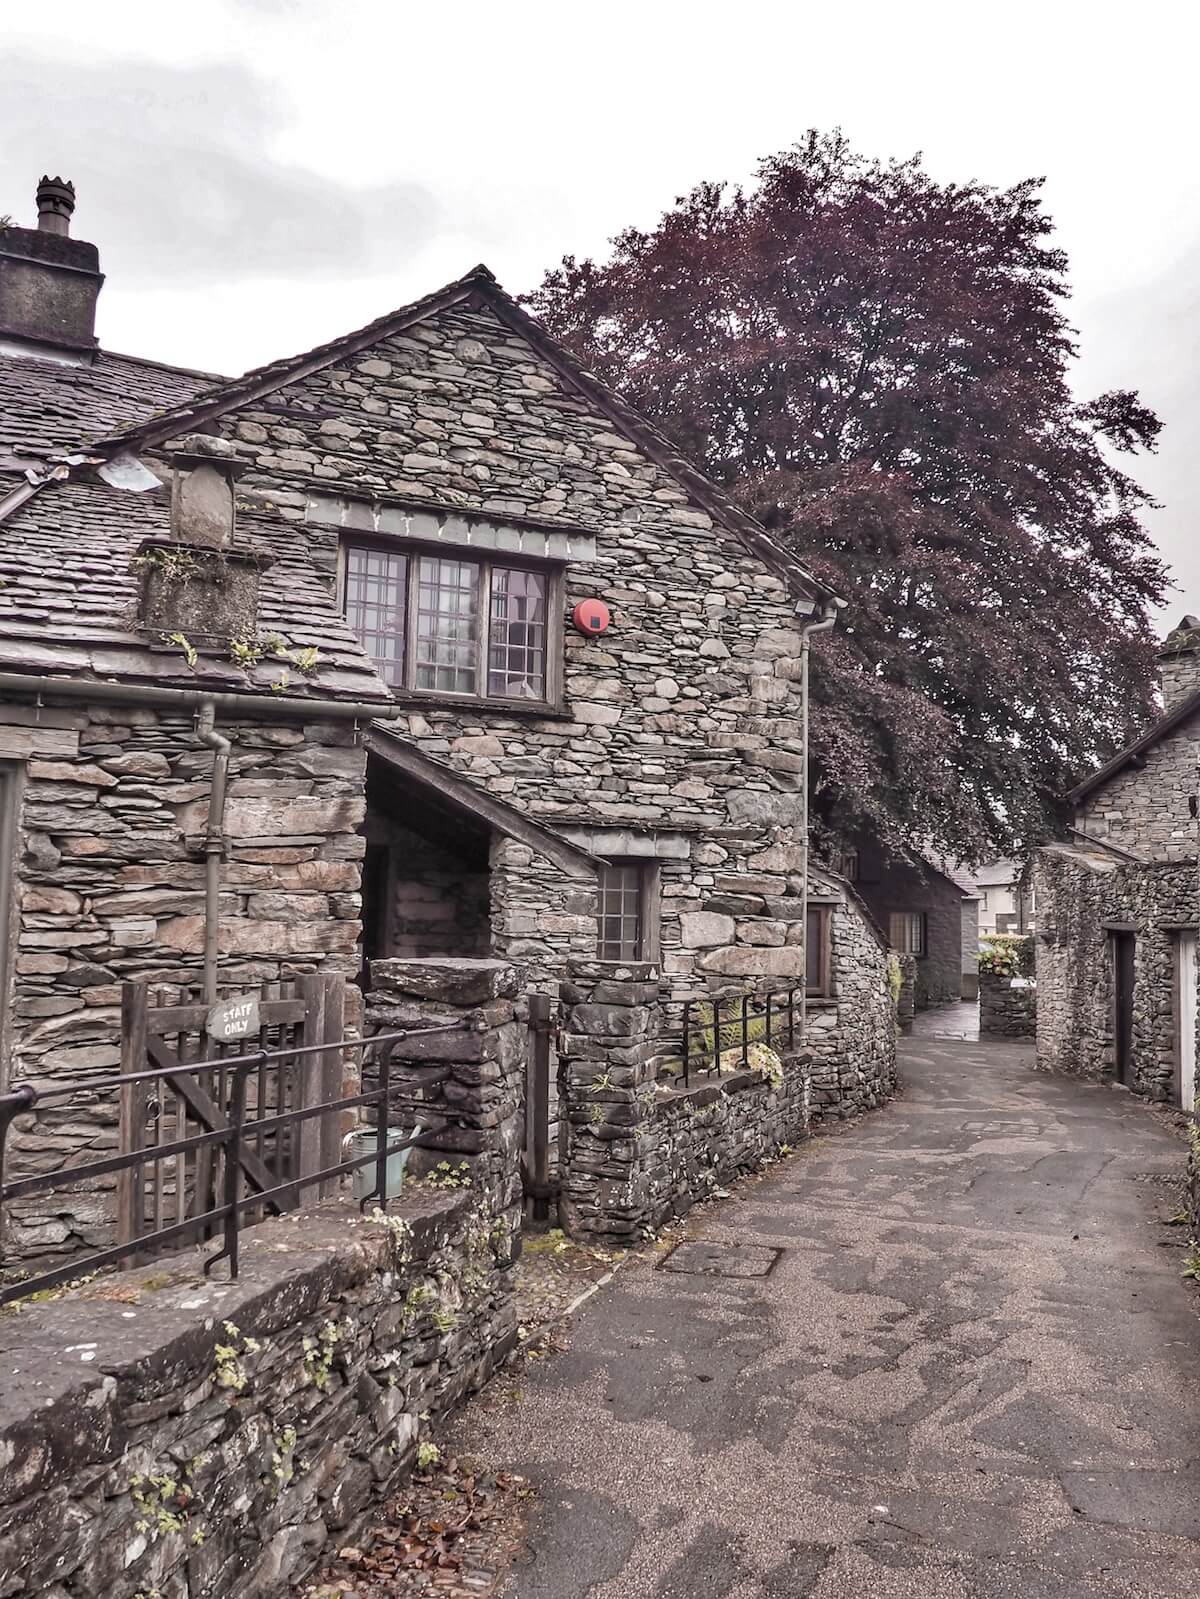 Visiting Dove Cottage in the Lake District